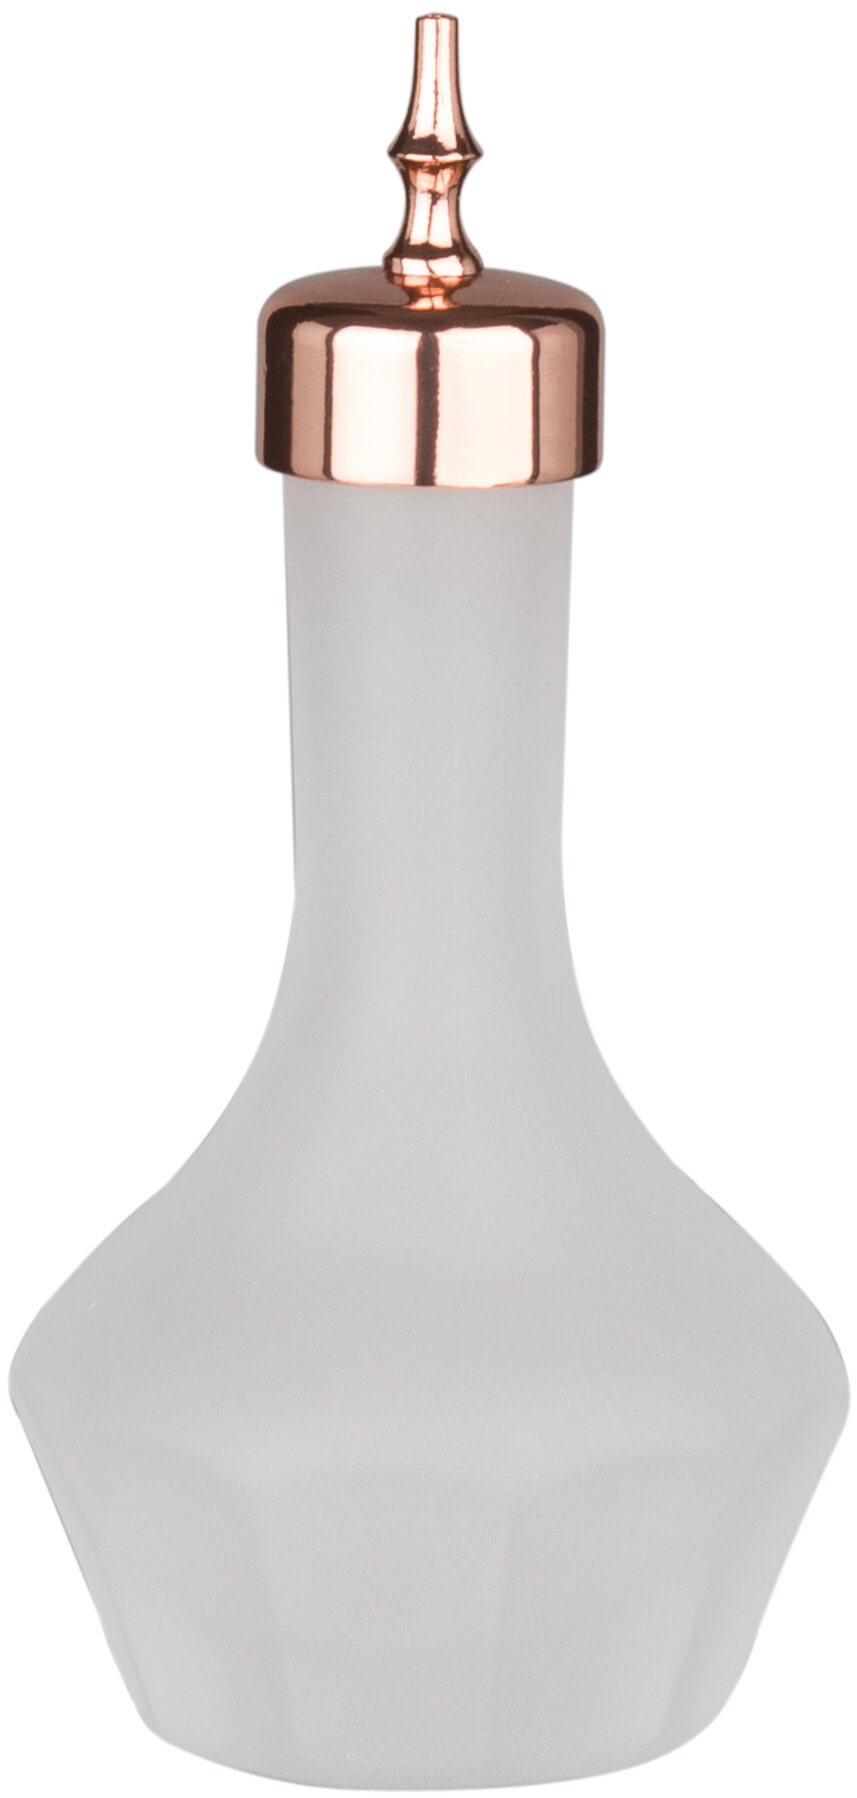 Bitters bottle frosted, Prime Bar, copper-colored lid - 50ml